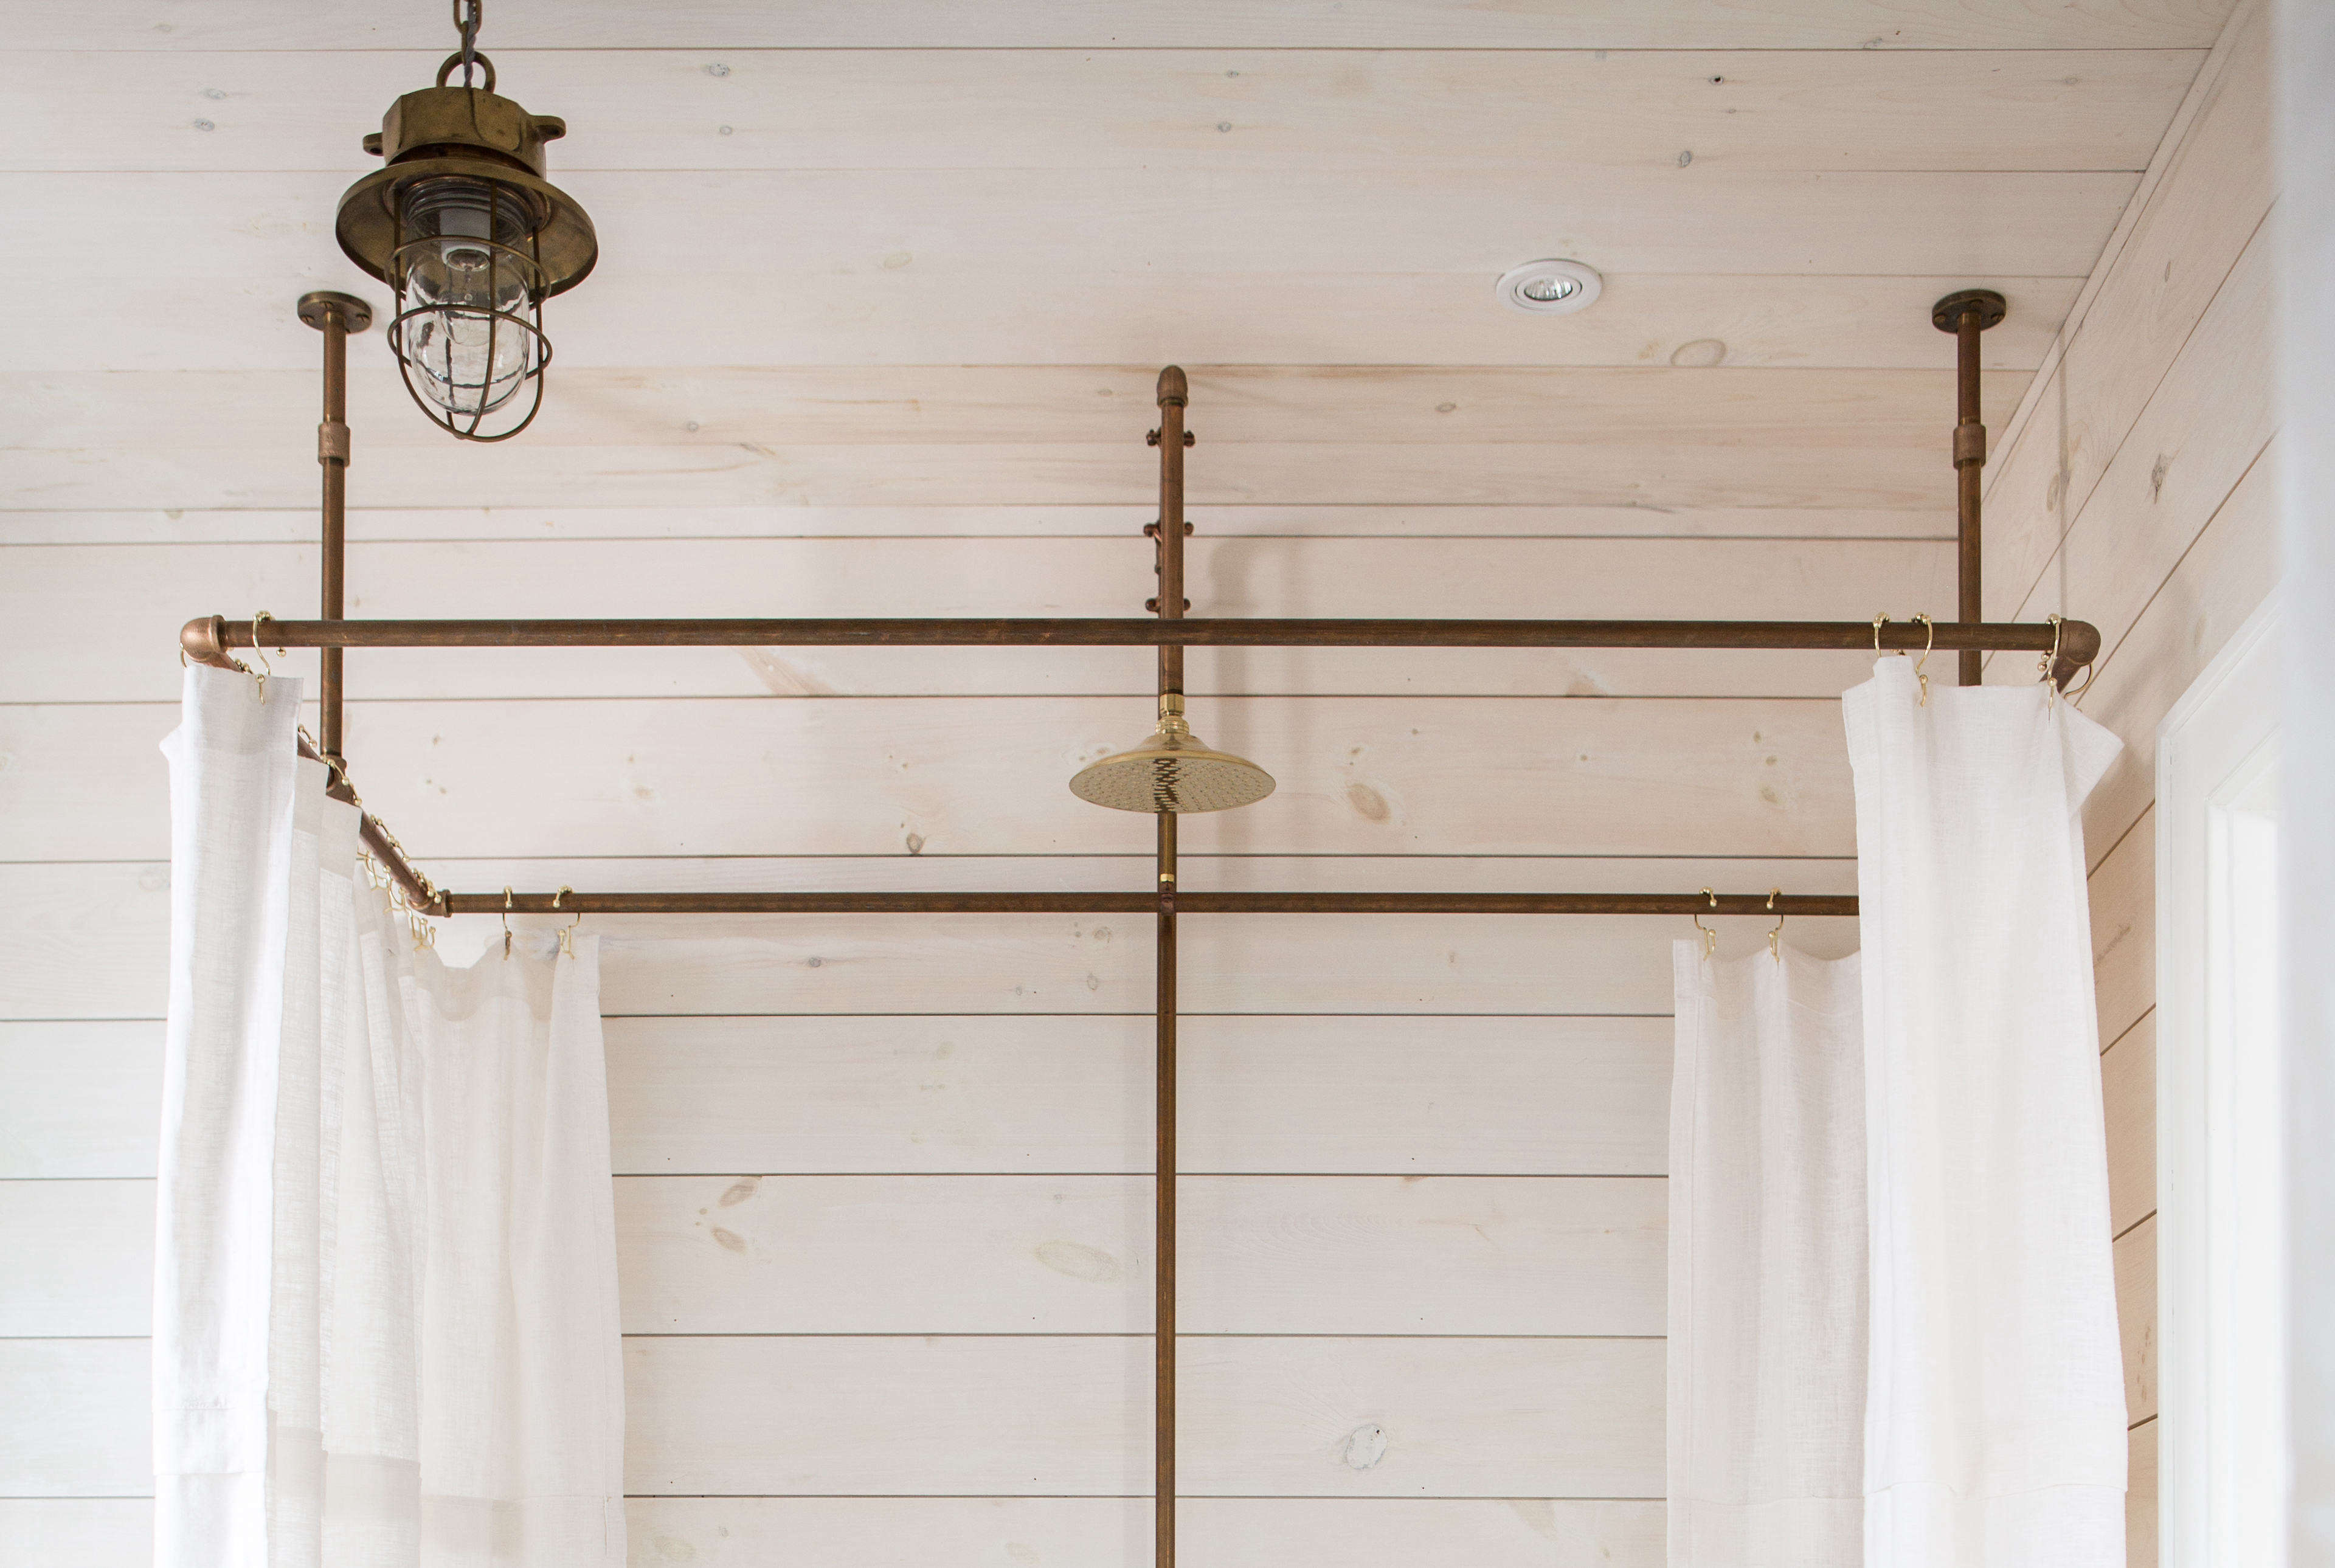 A Diy Shower Curtain Hoop Made From, Pvc Pipe Shower Curtain Rod